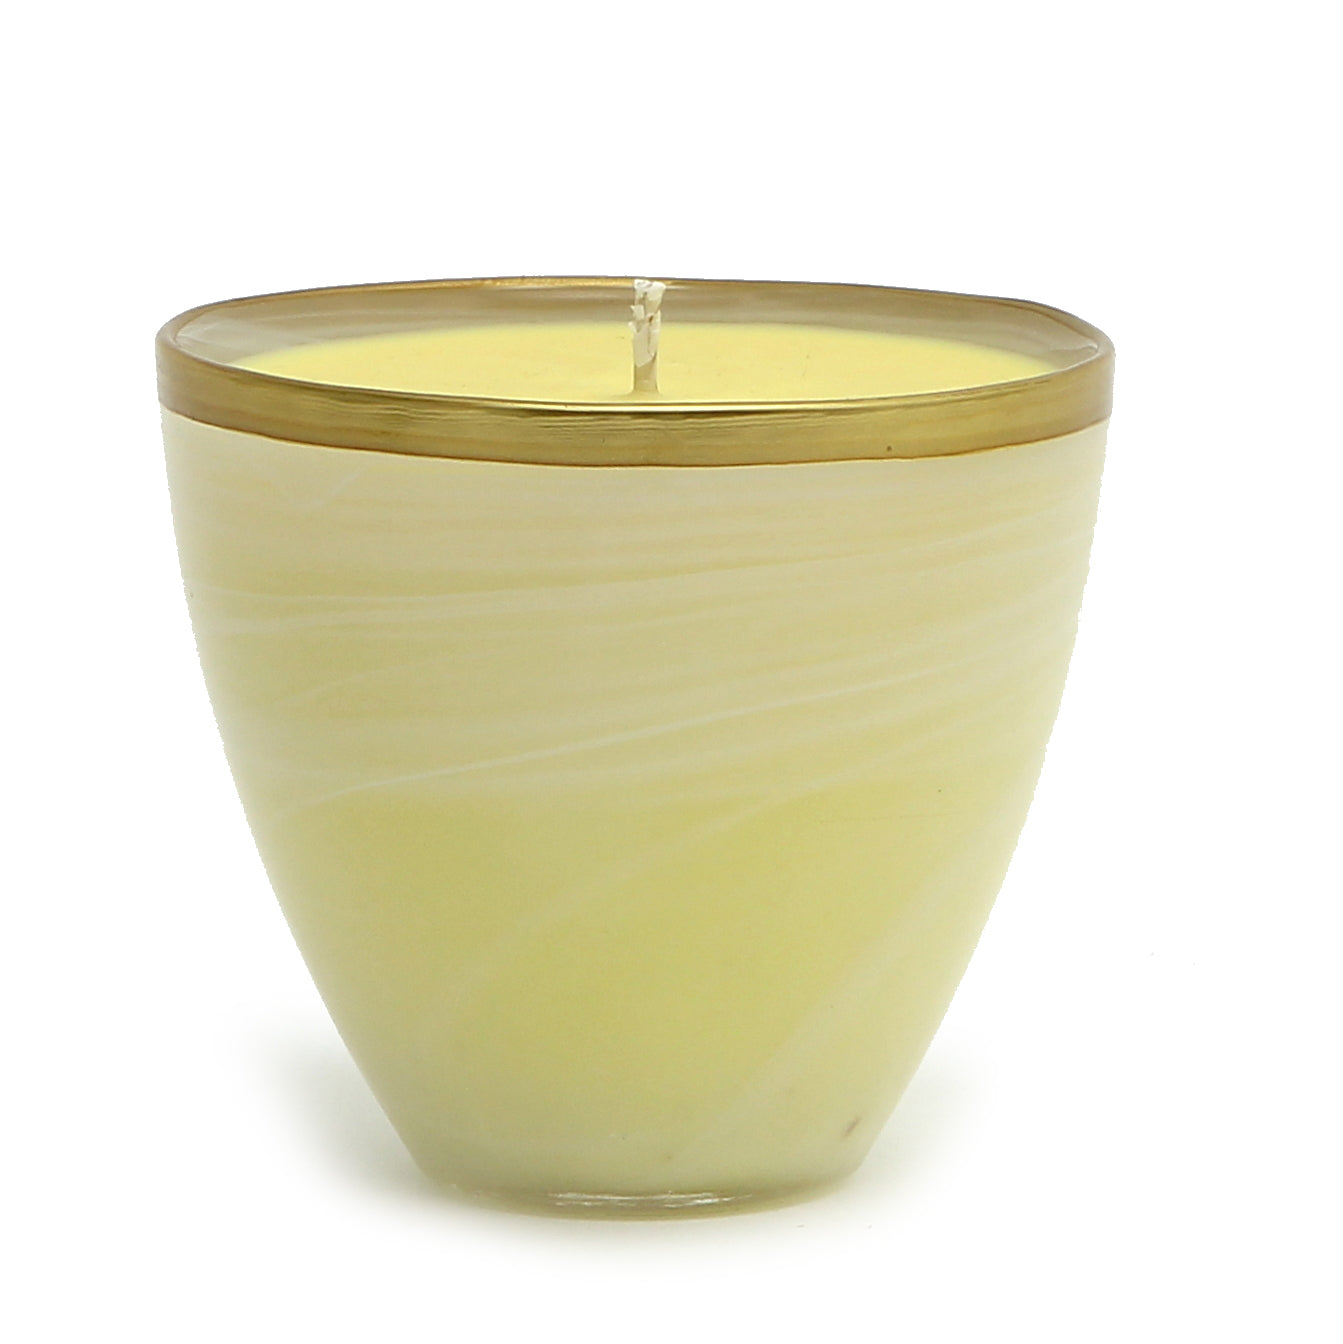 CRYSTAL CANDLES: Rufolo Glass Candle with Gold Rim - Artistica.com